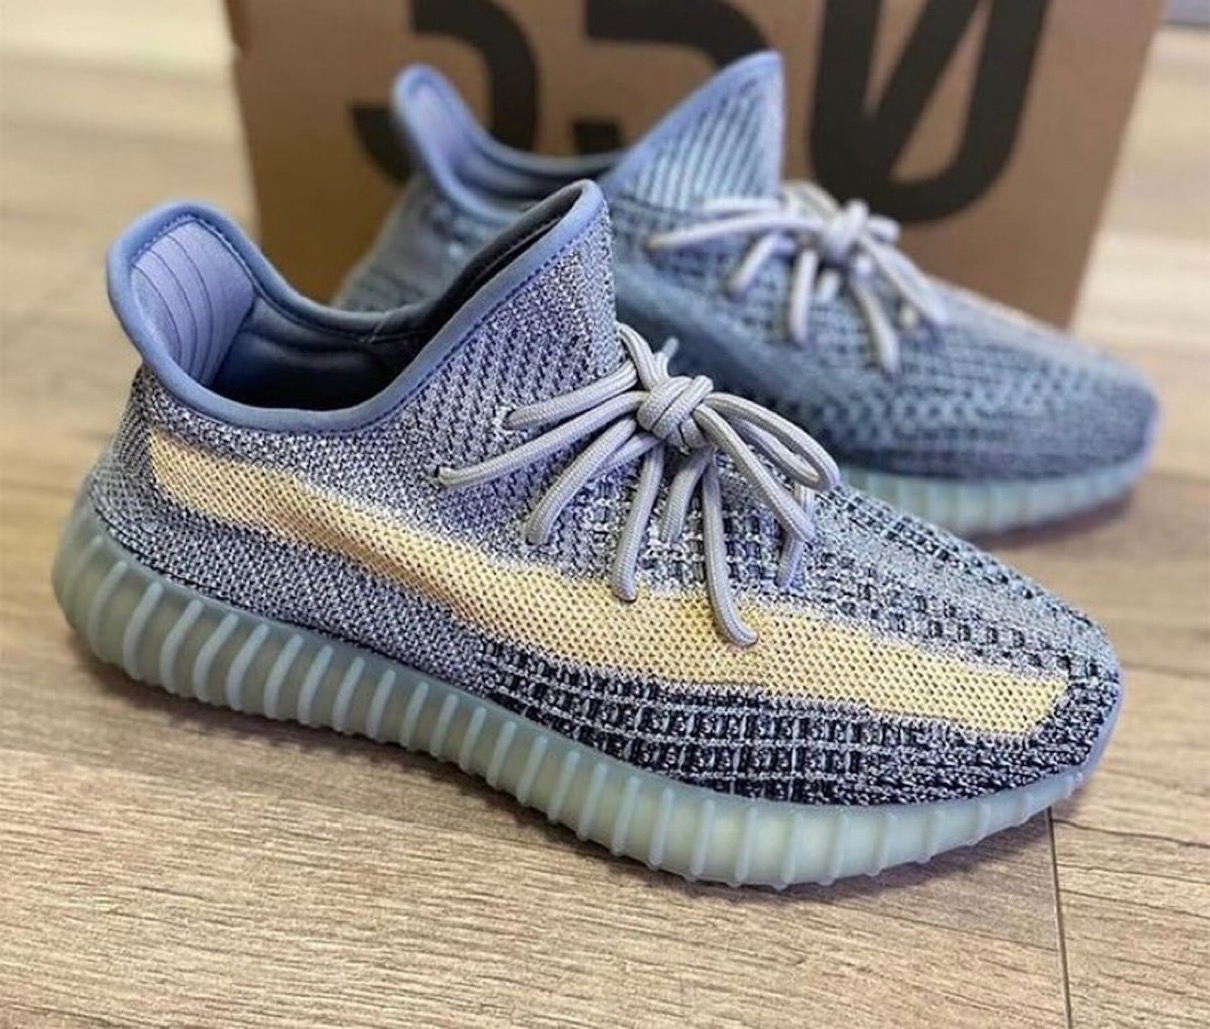 【adidas】YEEZY BOOST 350 V2 “ASH BLUE”が2021年2月27日に発売予定 | UP TO DATE